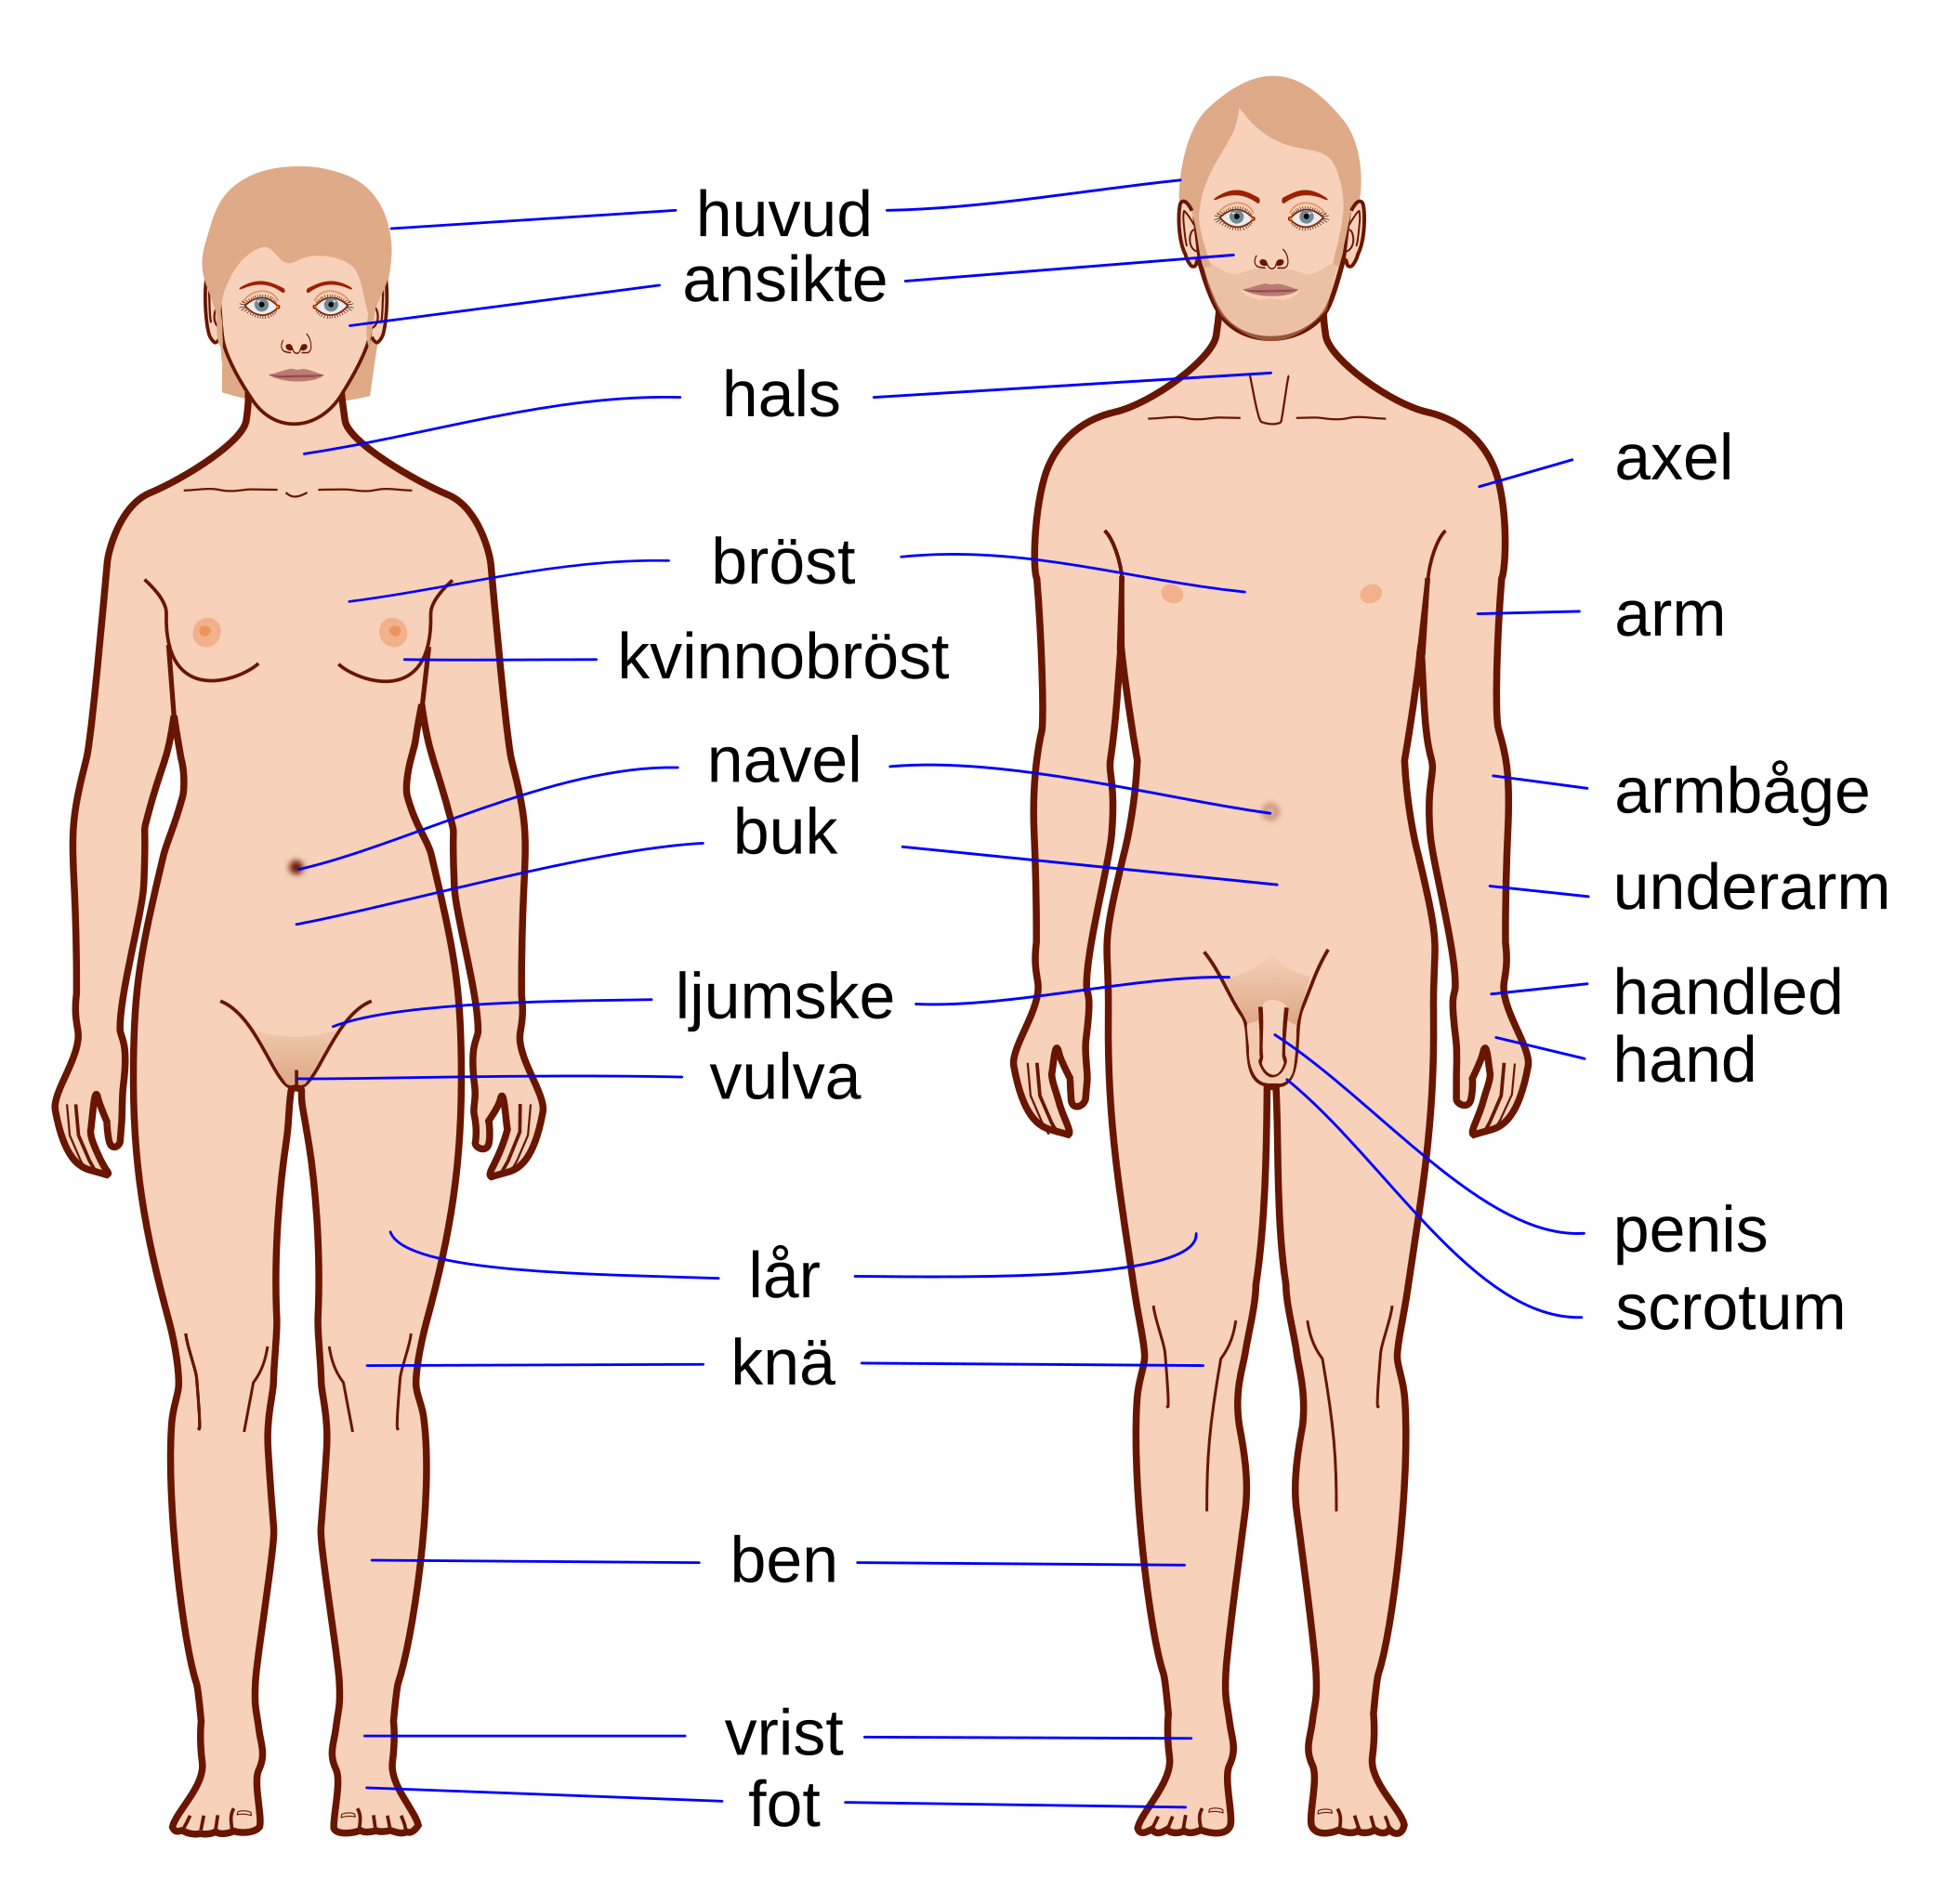 File:Human body features-sv.svg - Wikipedia